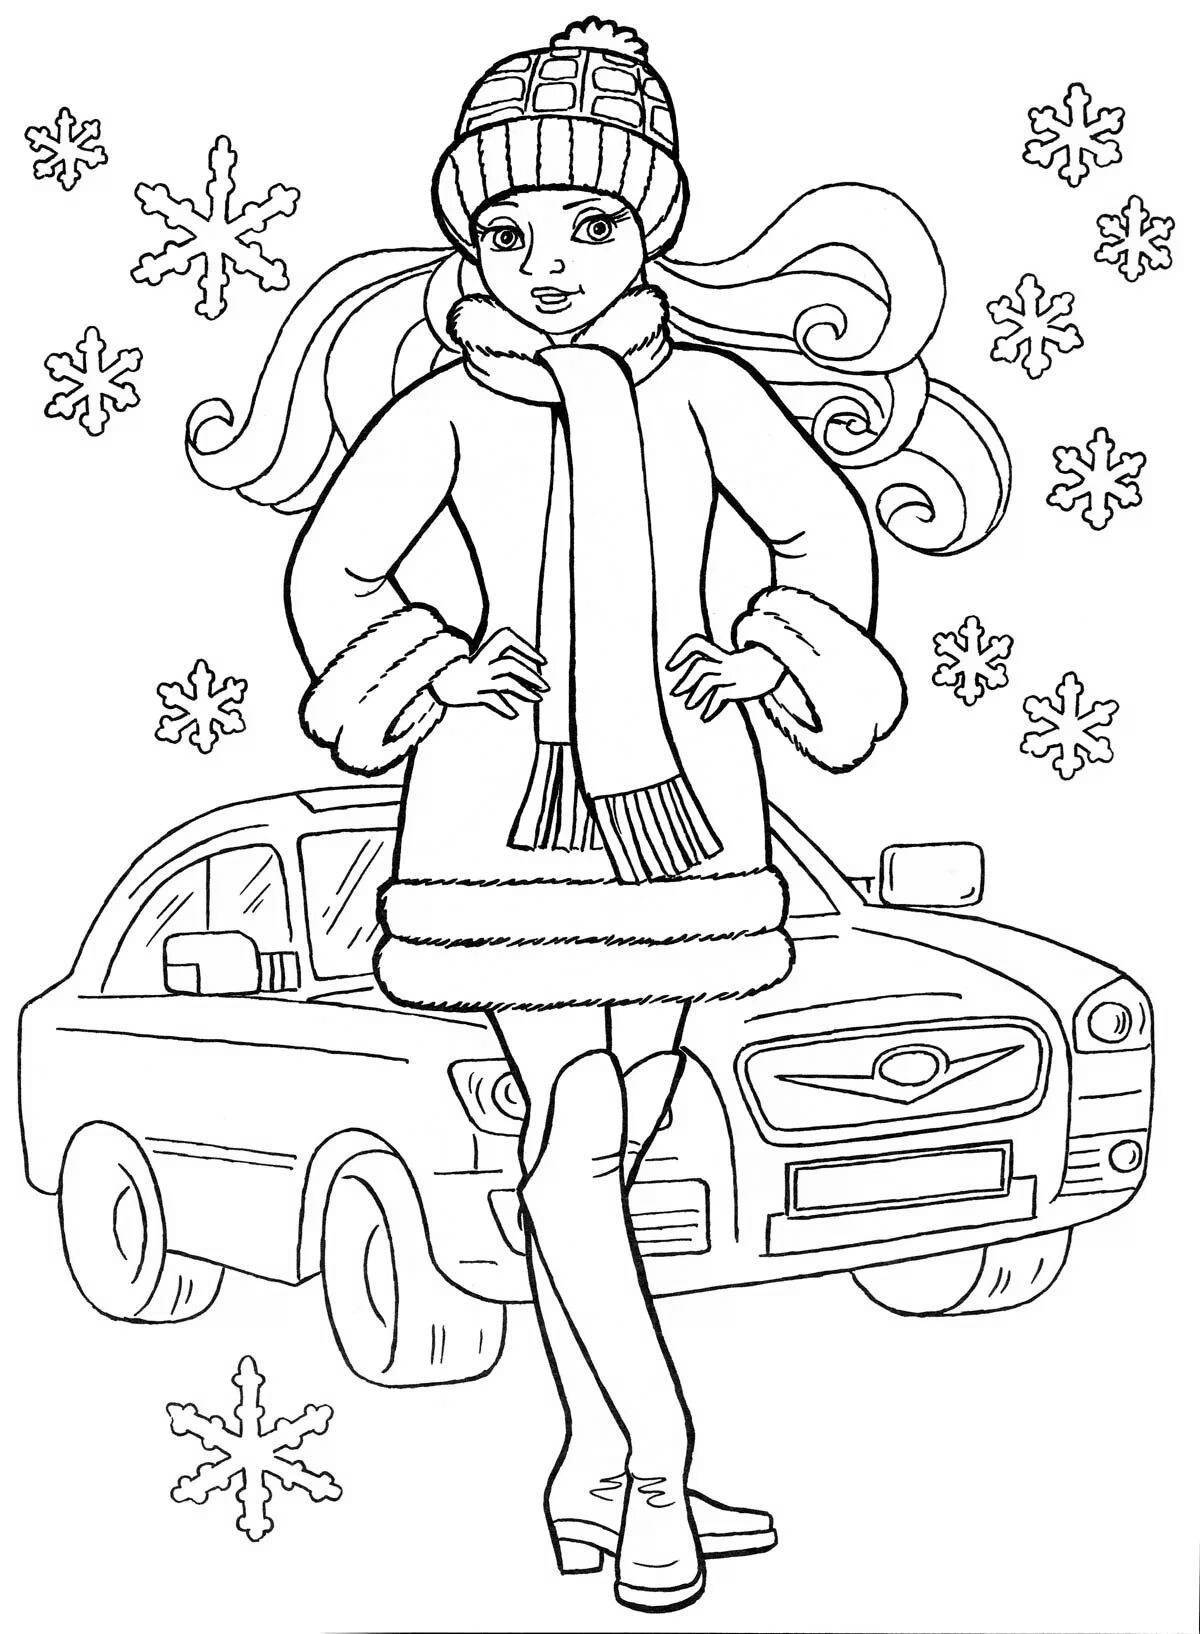 Exquisite barbie in the car coloring book